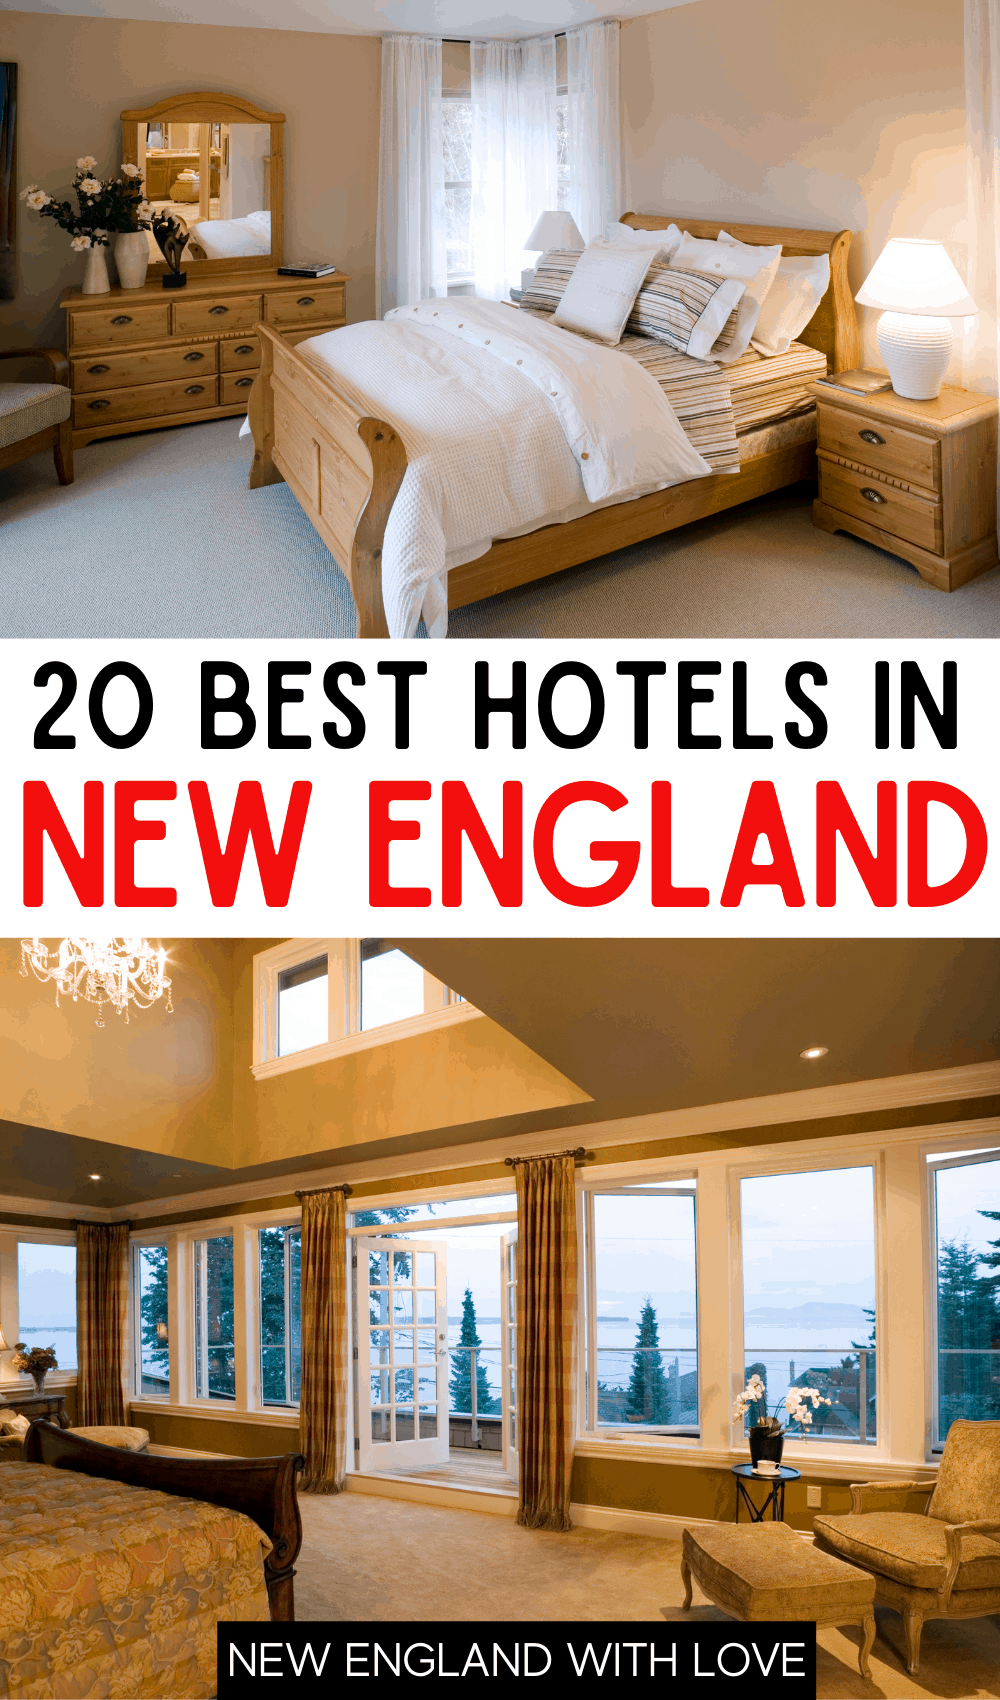 Pinterest graphic reading "20 BEST HOTELS IN NEW ENGLAND"